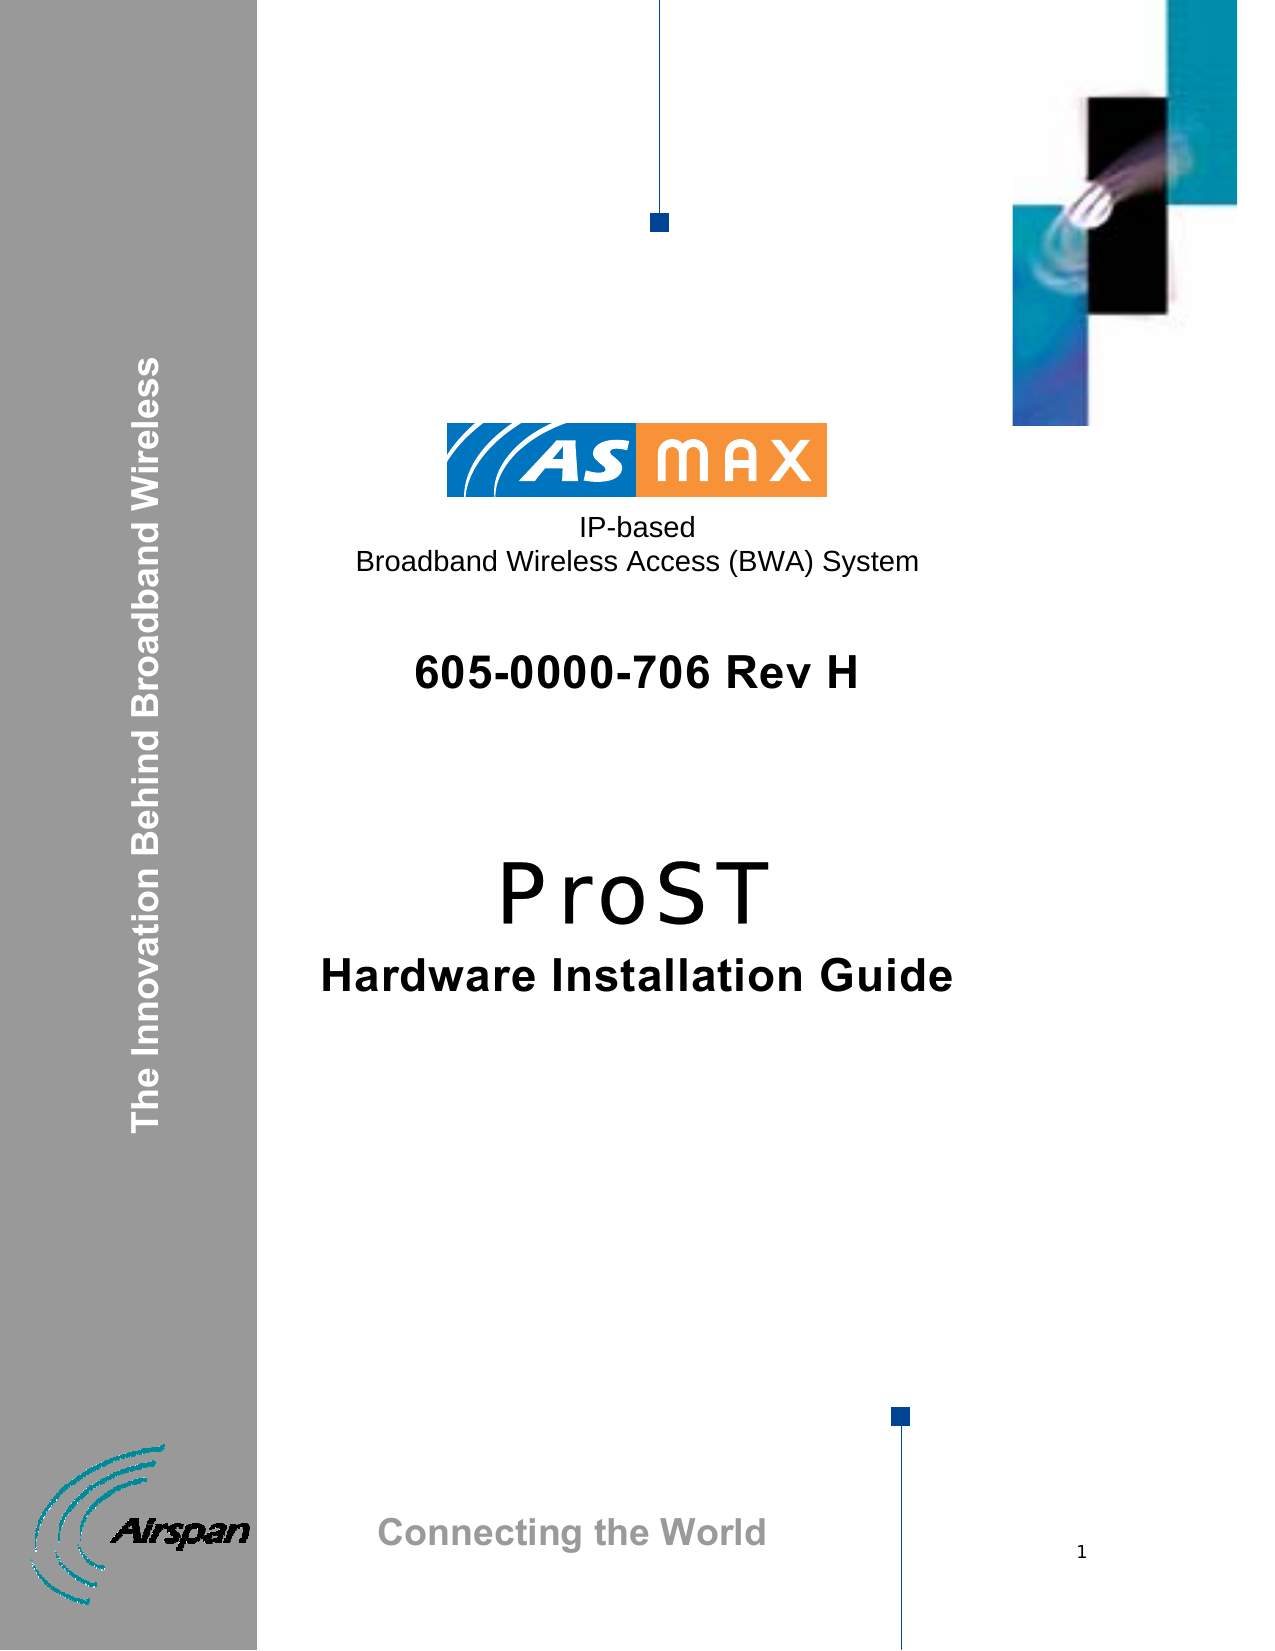 1           IP-based  Broadband Wireless Access (BWA) System   605-0000-706 Rev H    ProST Hardware Installation Guide                                       The Innovation Behind Broadband Wireless Connecting the World 